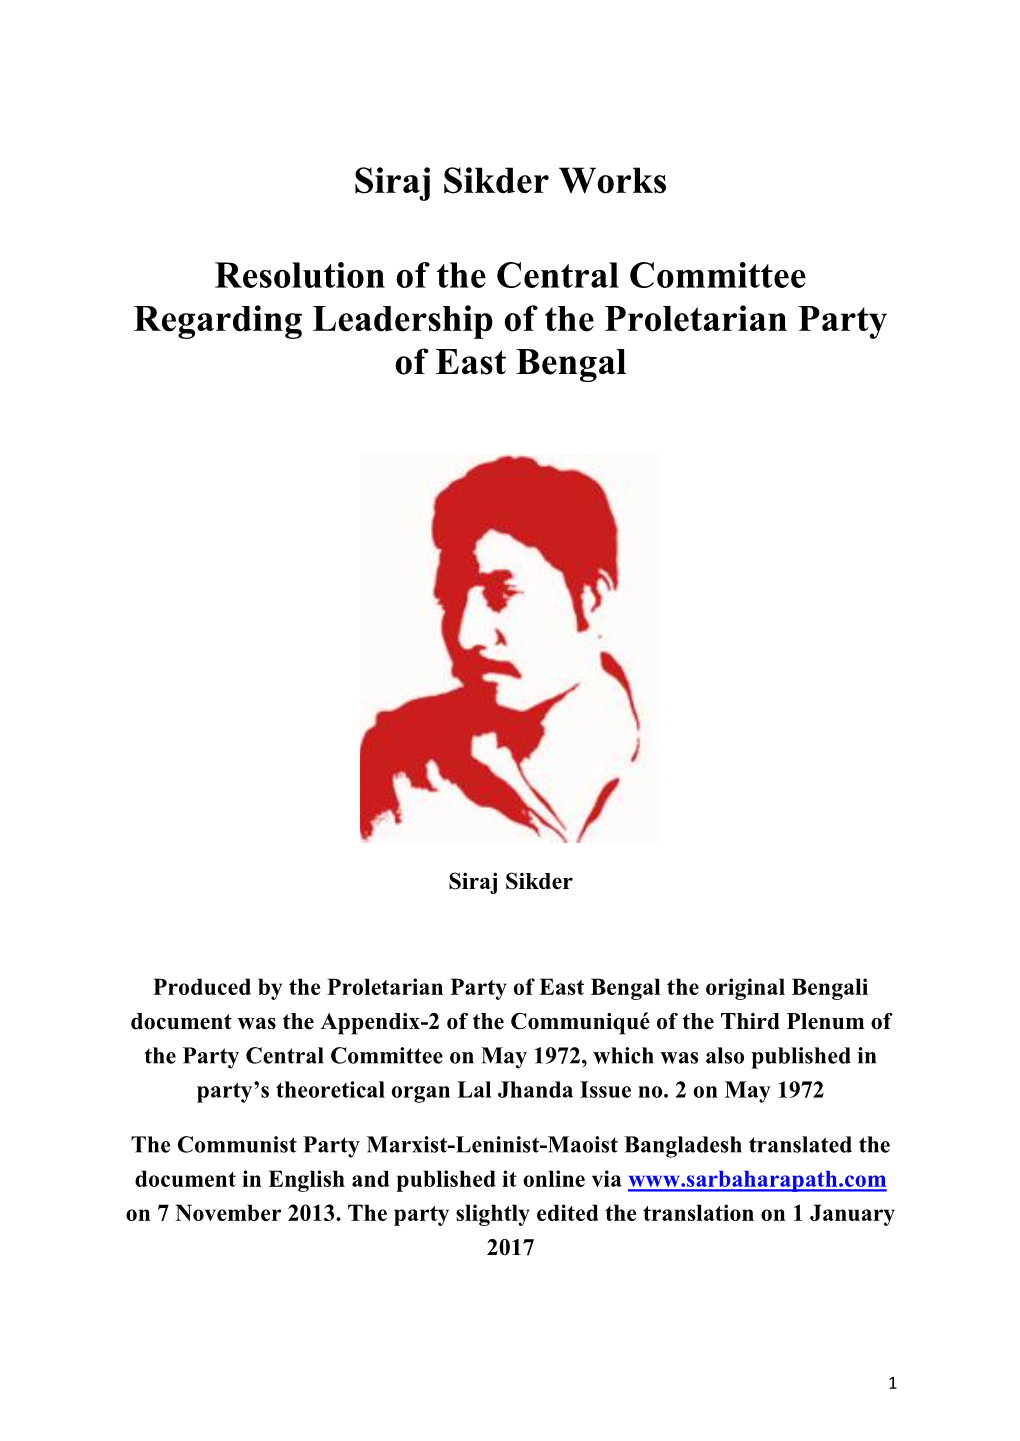 Siraj Sikder Works Resolution of the Central Committee Regarding